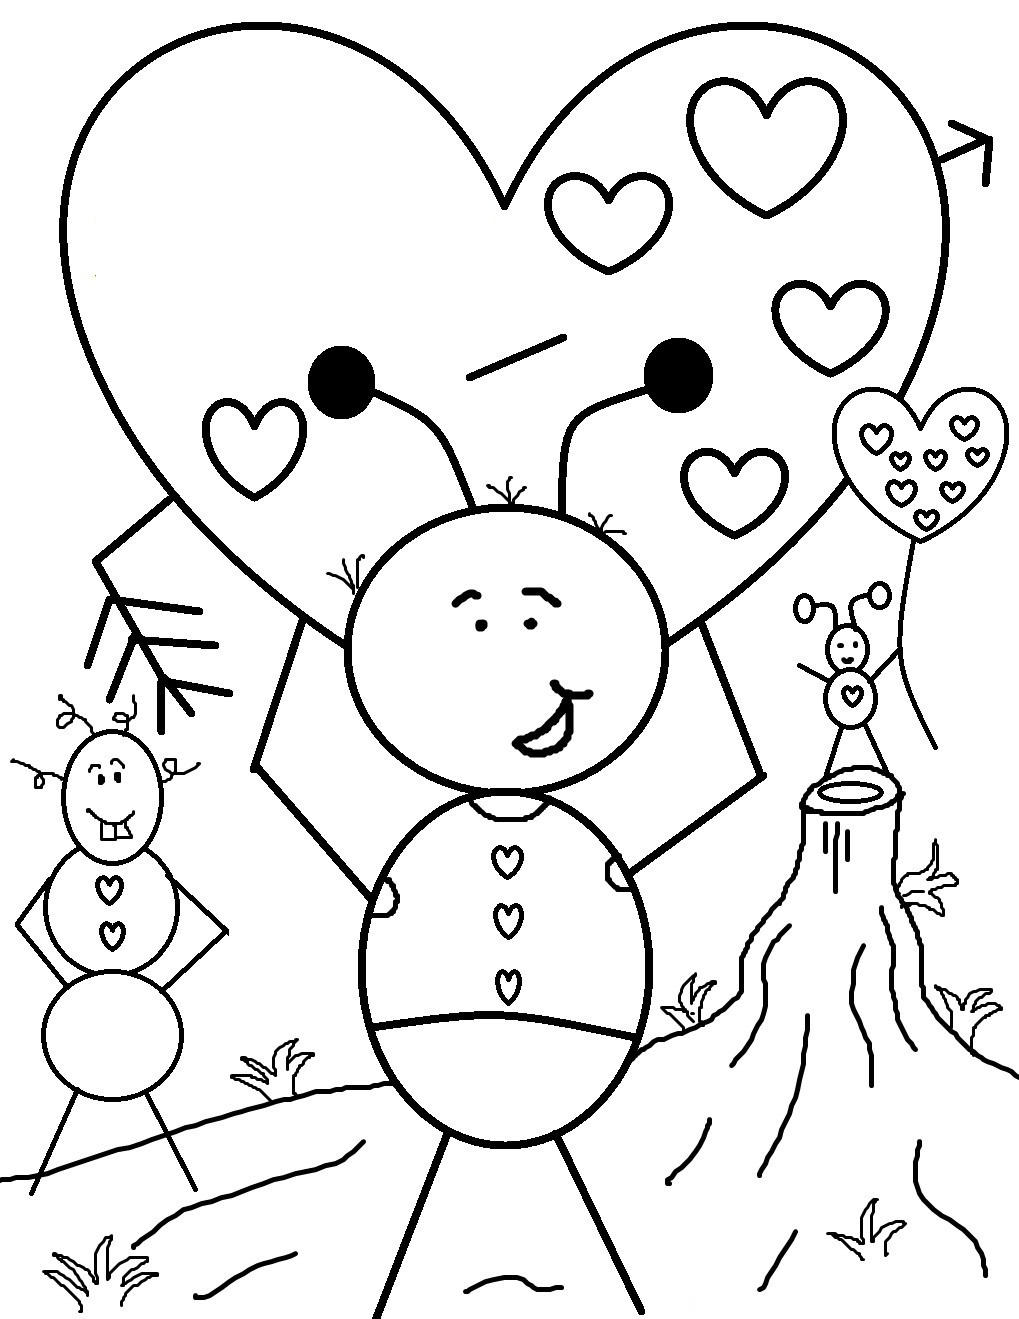 Valentine Coloring Sheets Free Printable
 Free Printable Valentine Coloring Pages For Kids